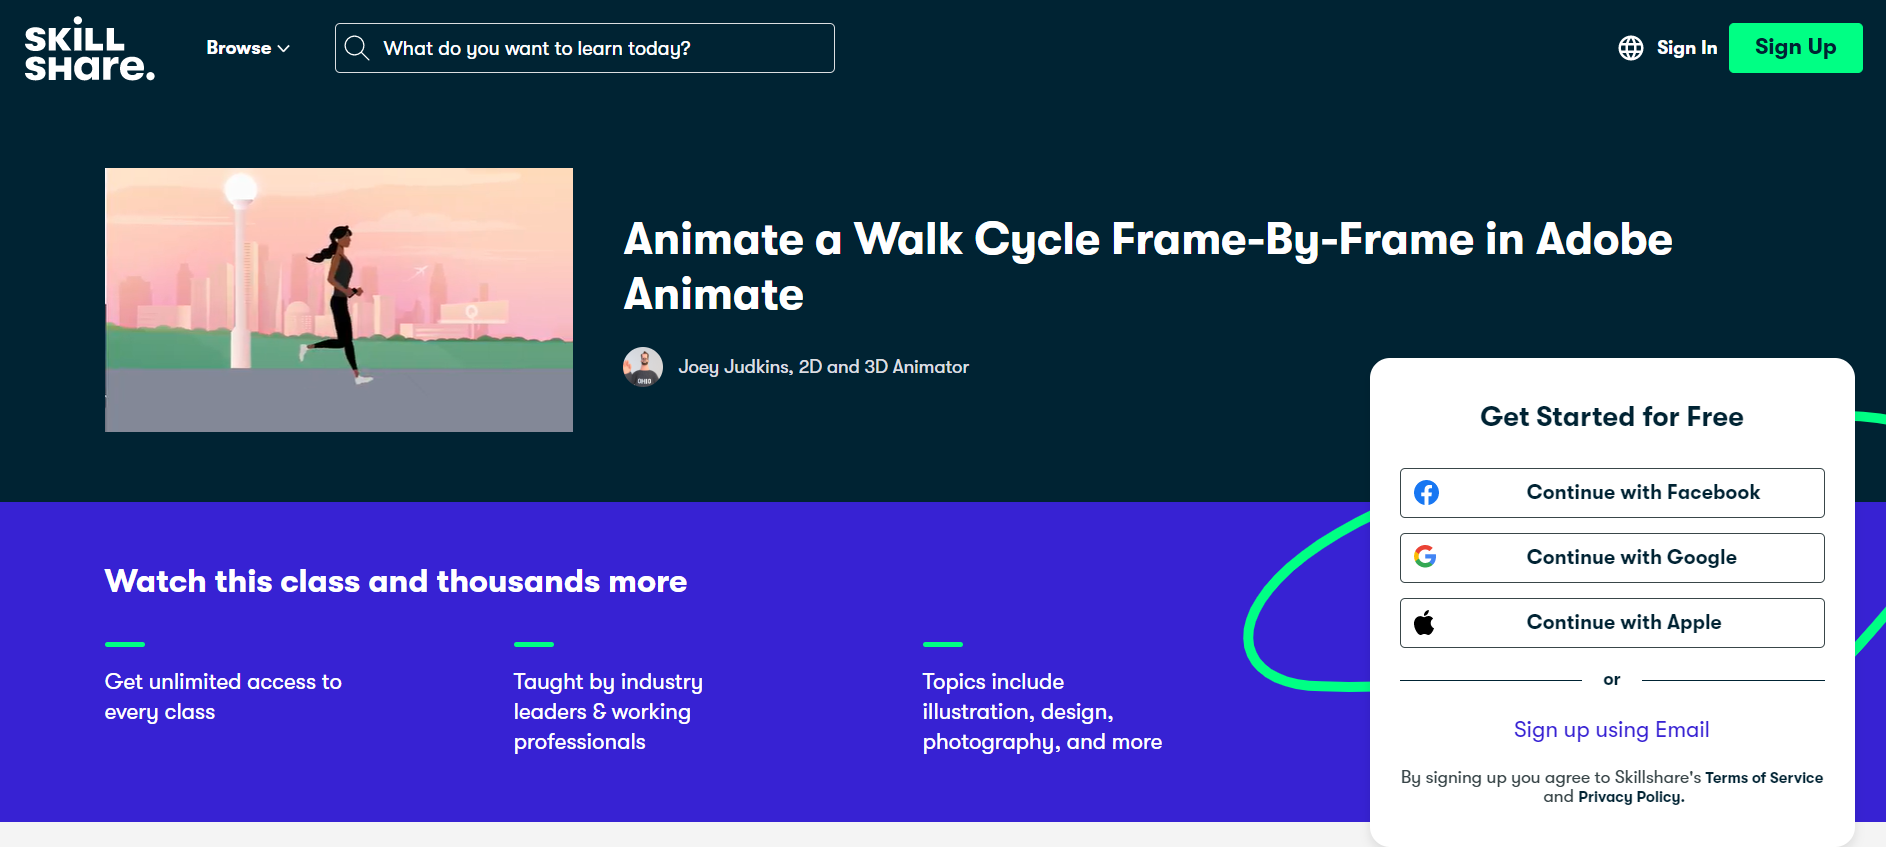 Animate a Walk-Cycle Frame-by-Frame in Adobe Animate